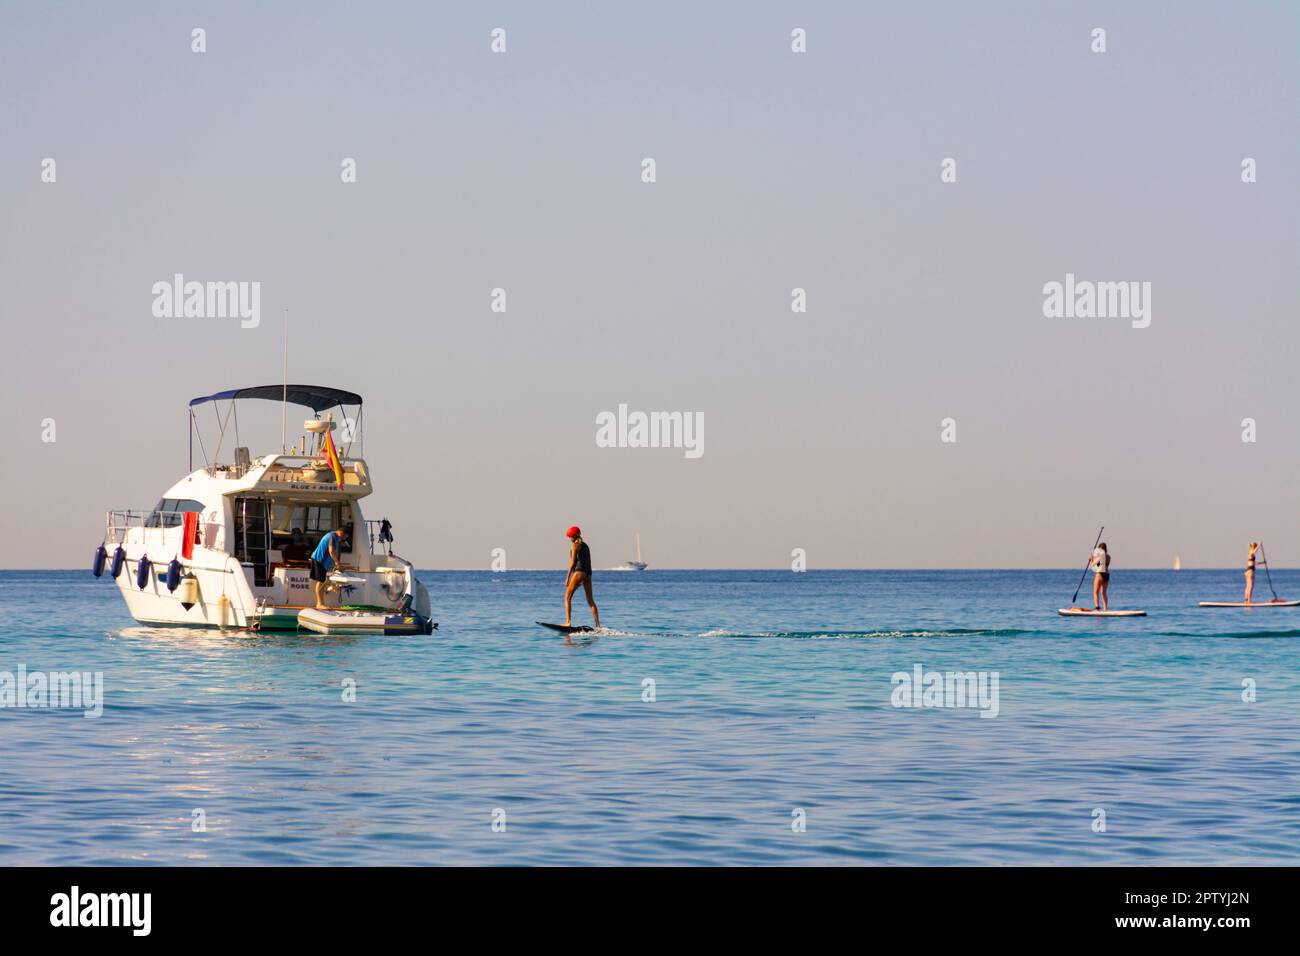 Palma, Mallorca, Spain. July 23, 2022 - Cala Major beach. Moored yacht and people with paddle surfing and fliteboard or jetsurf Stock Photo